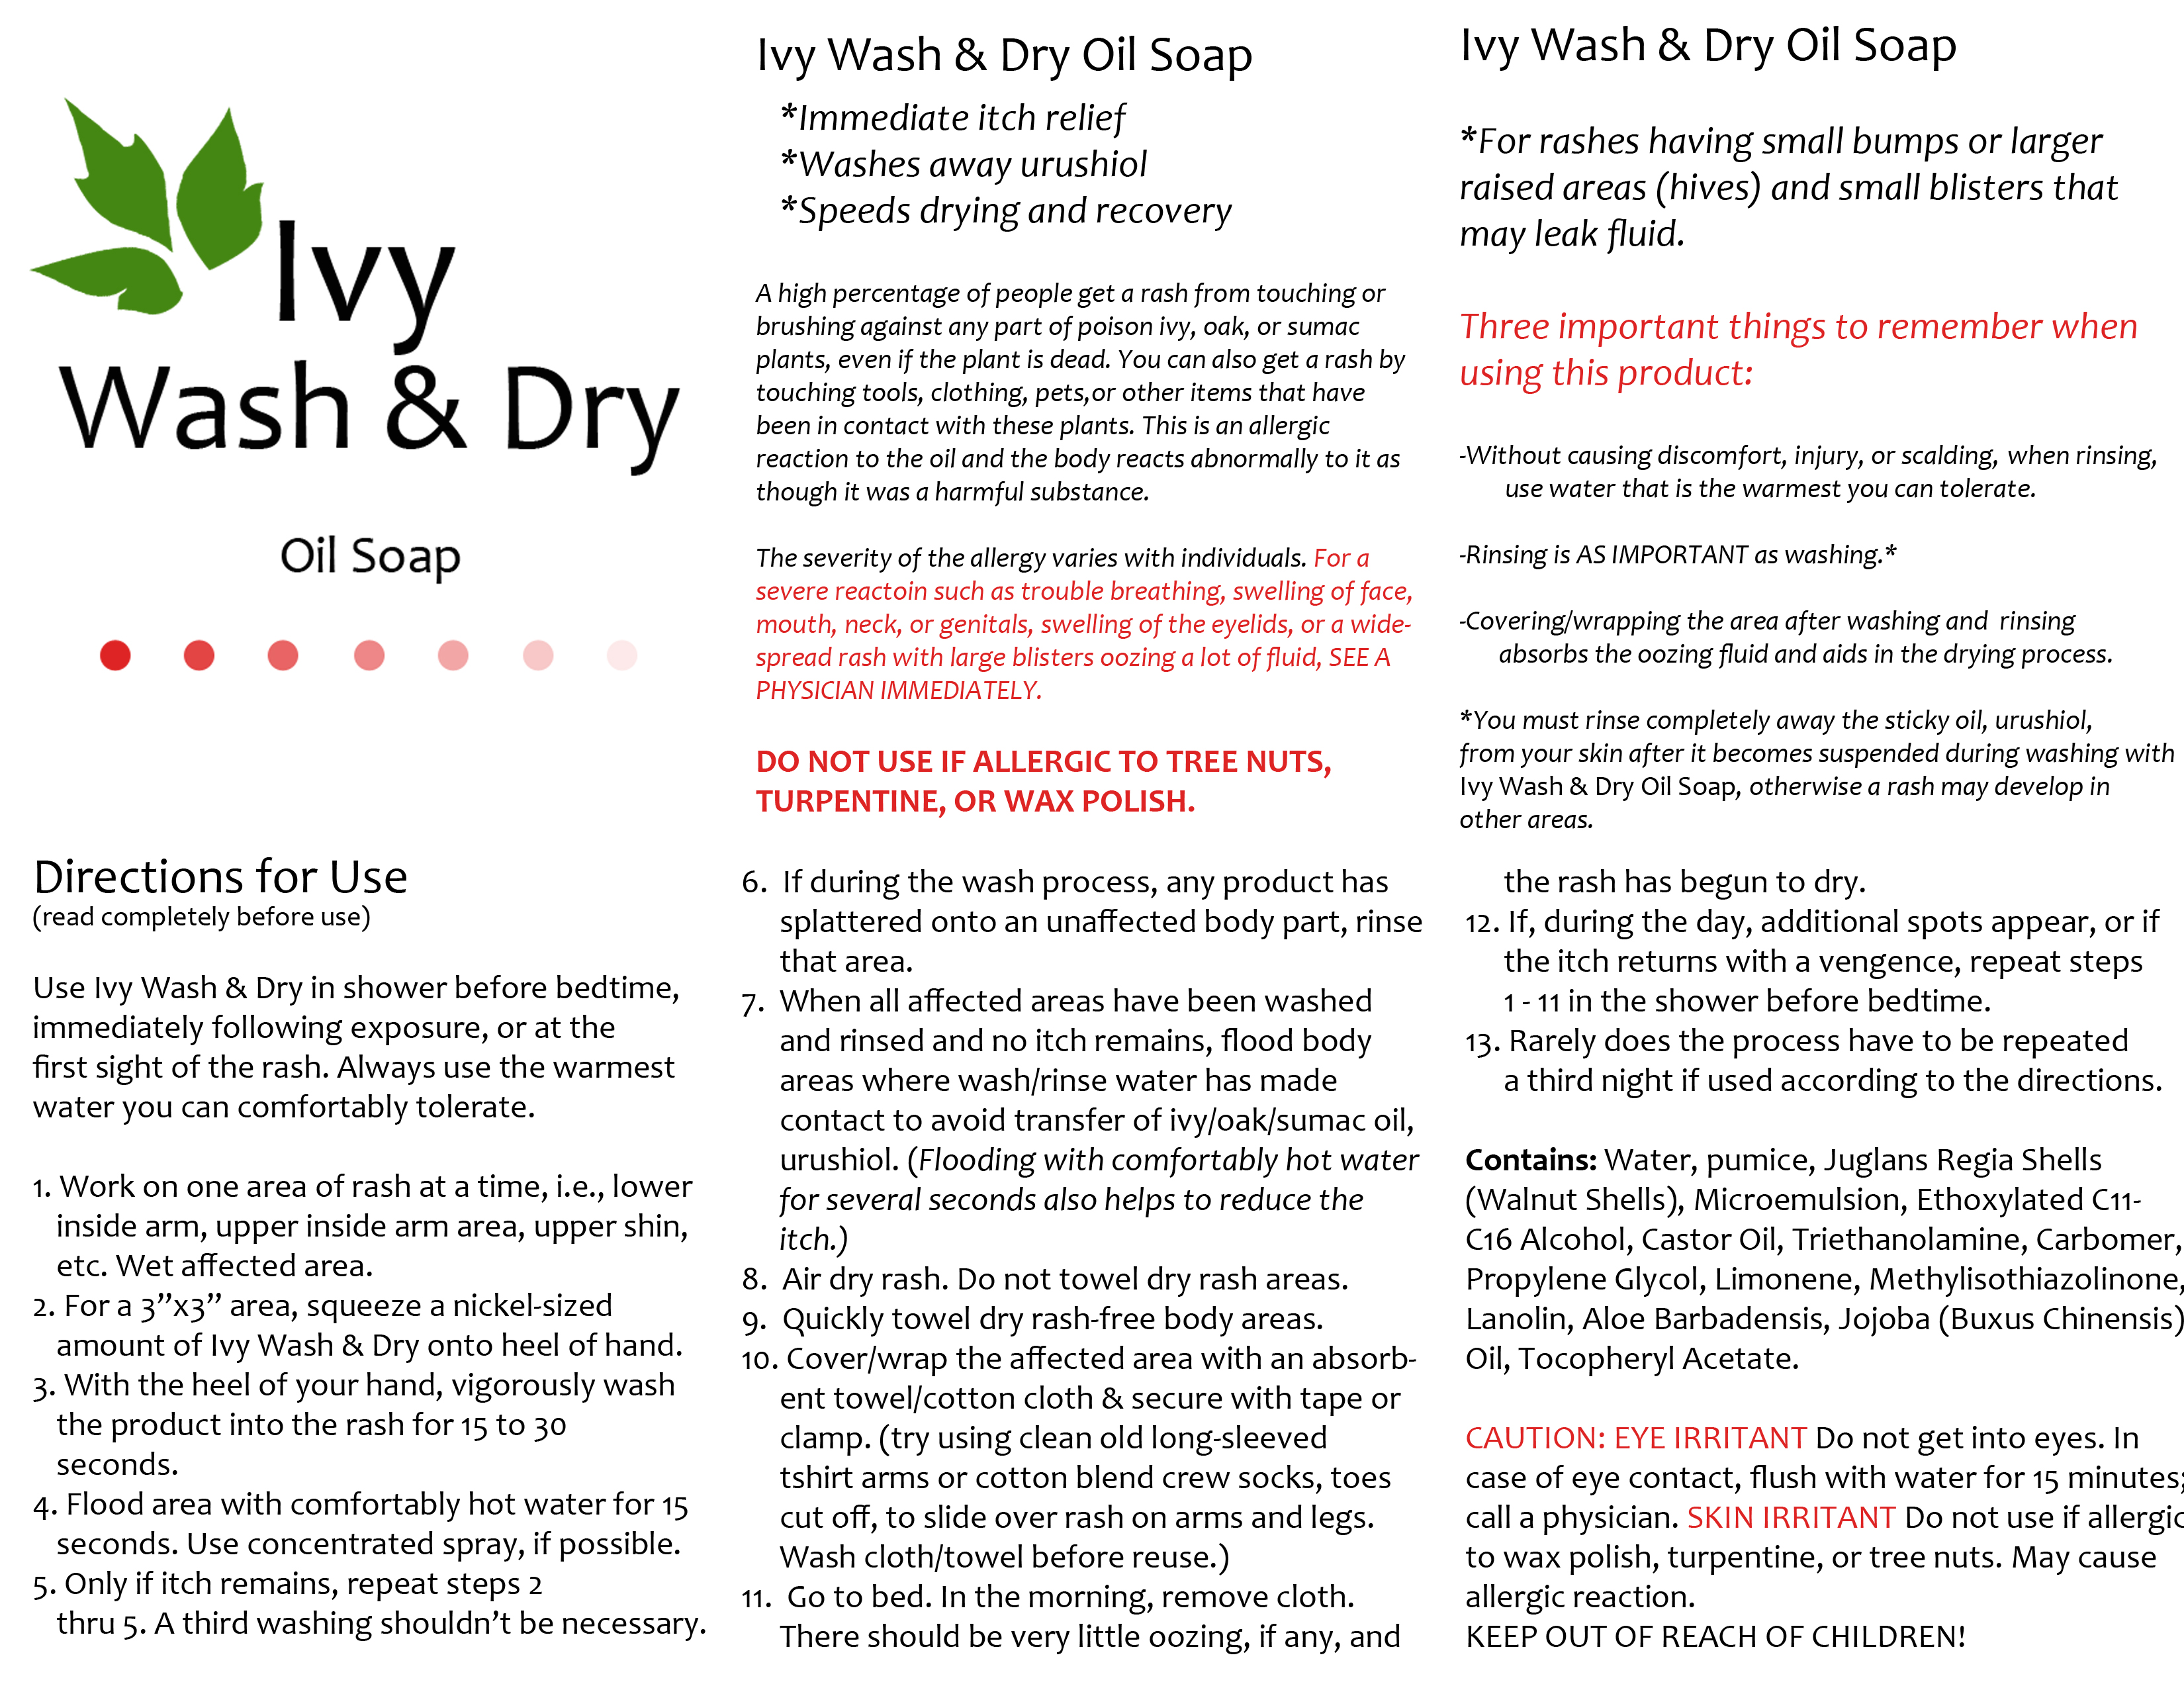 Ivy Wash & Dry Directions For Use